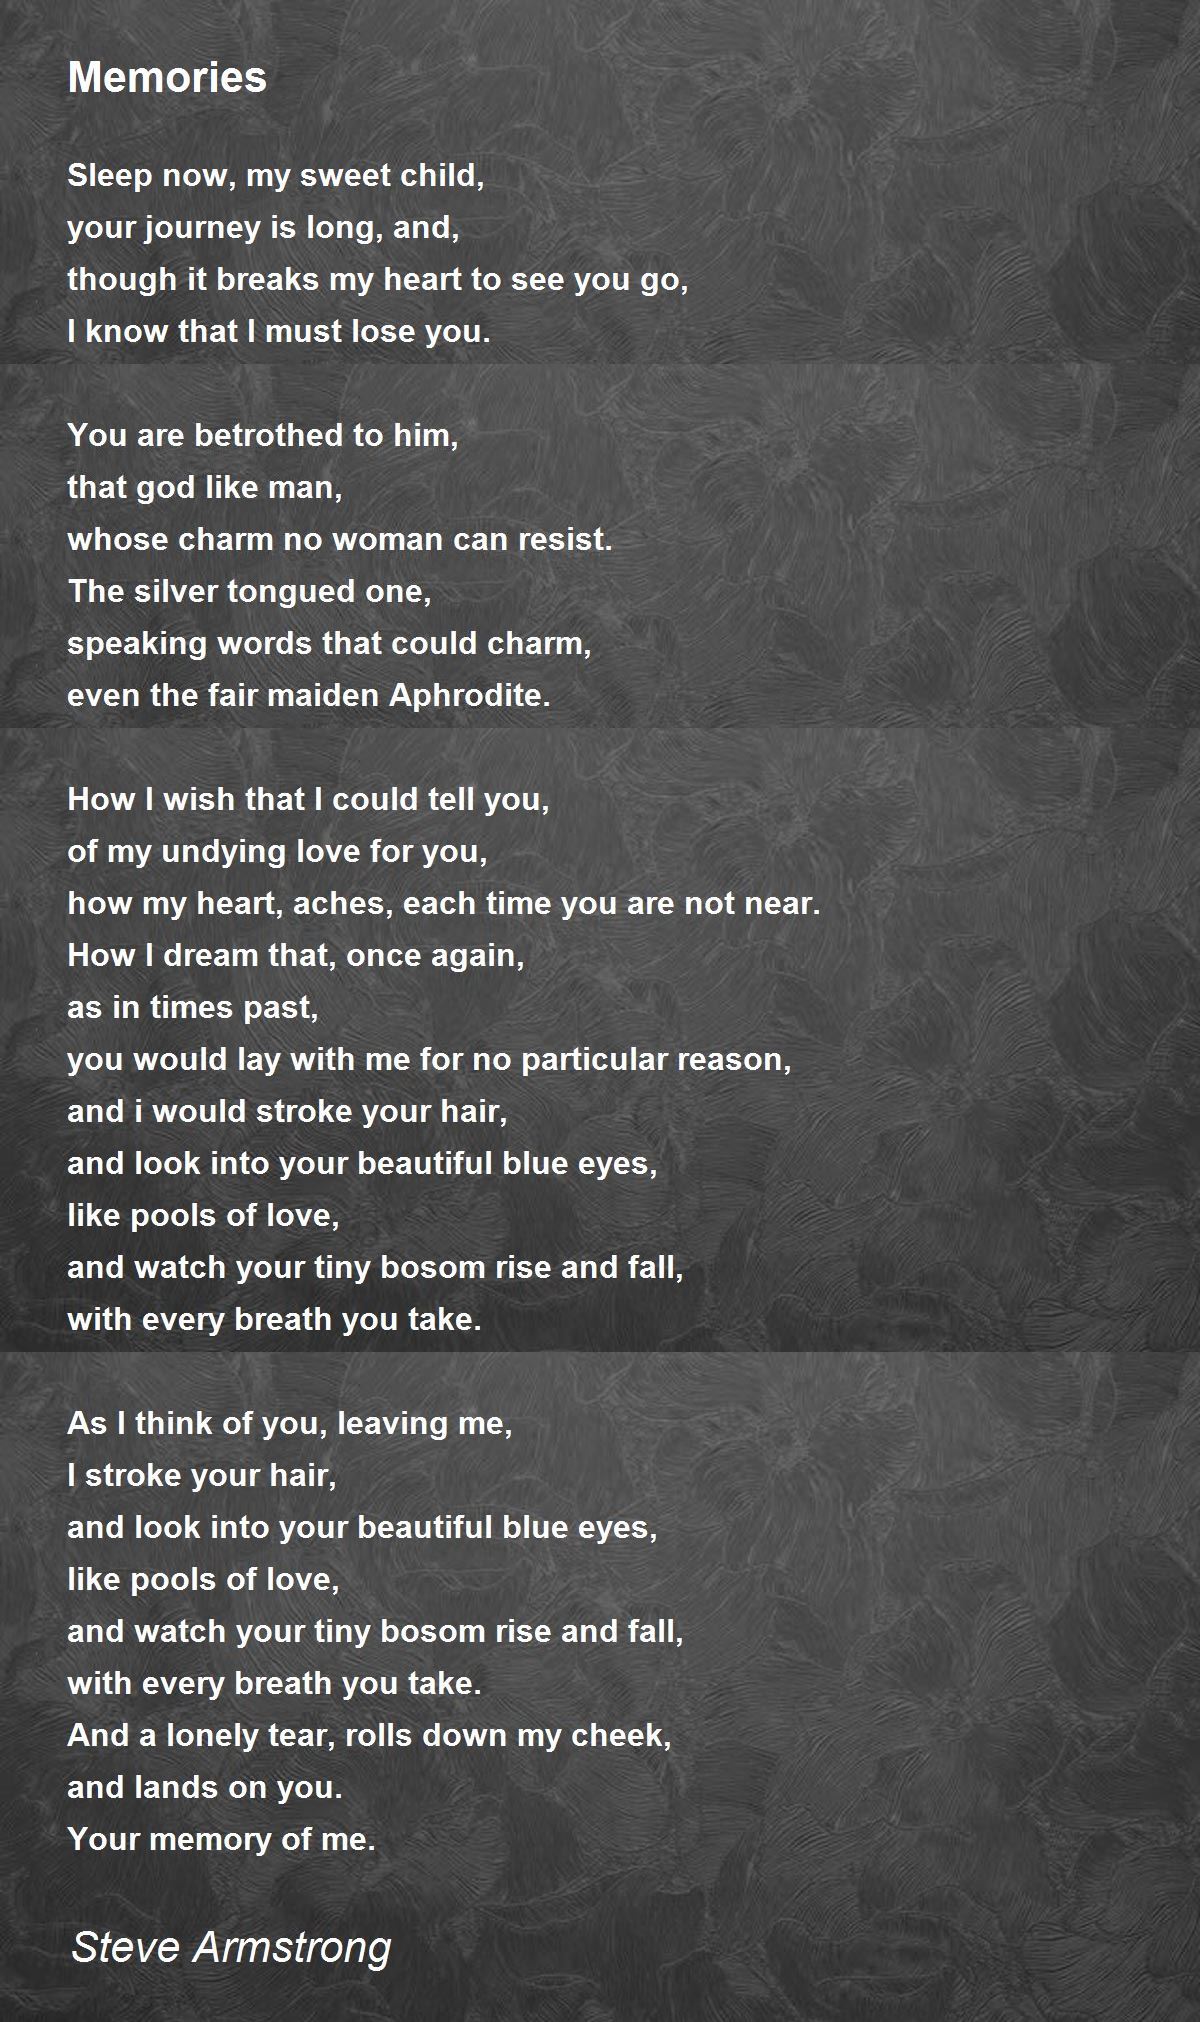 I Yearn For You - I Yearn For You Poem by Steve Armstrong